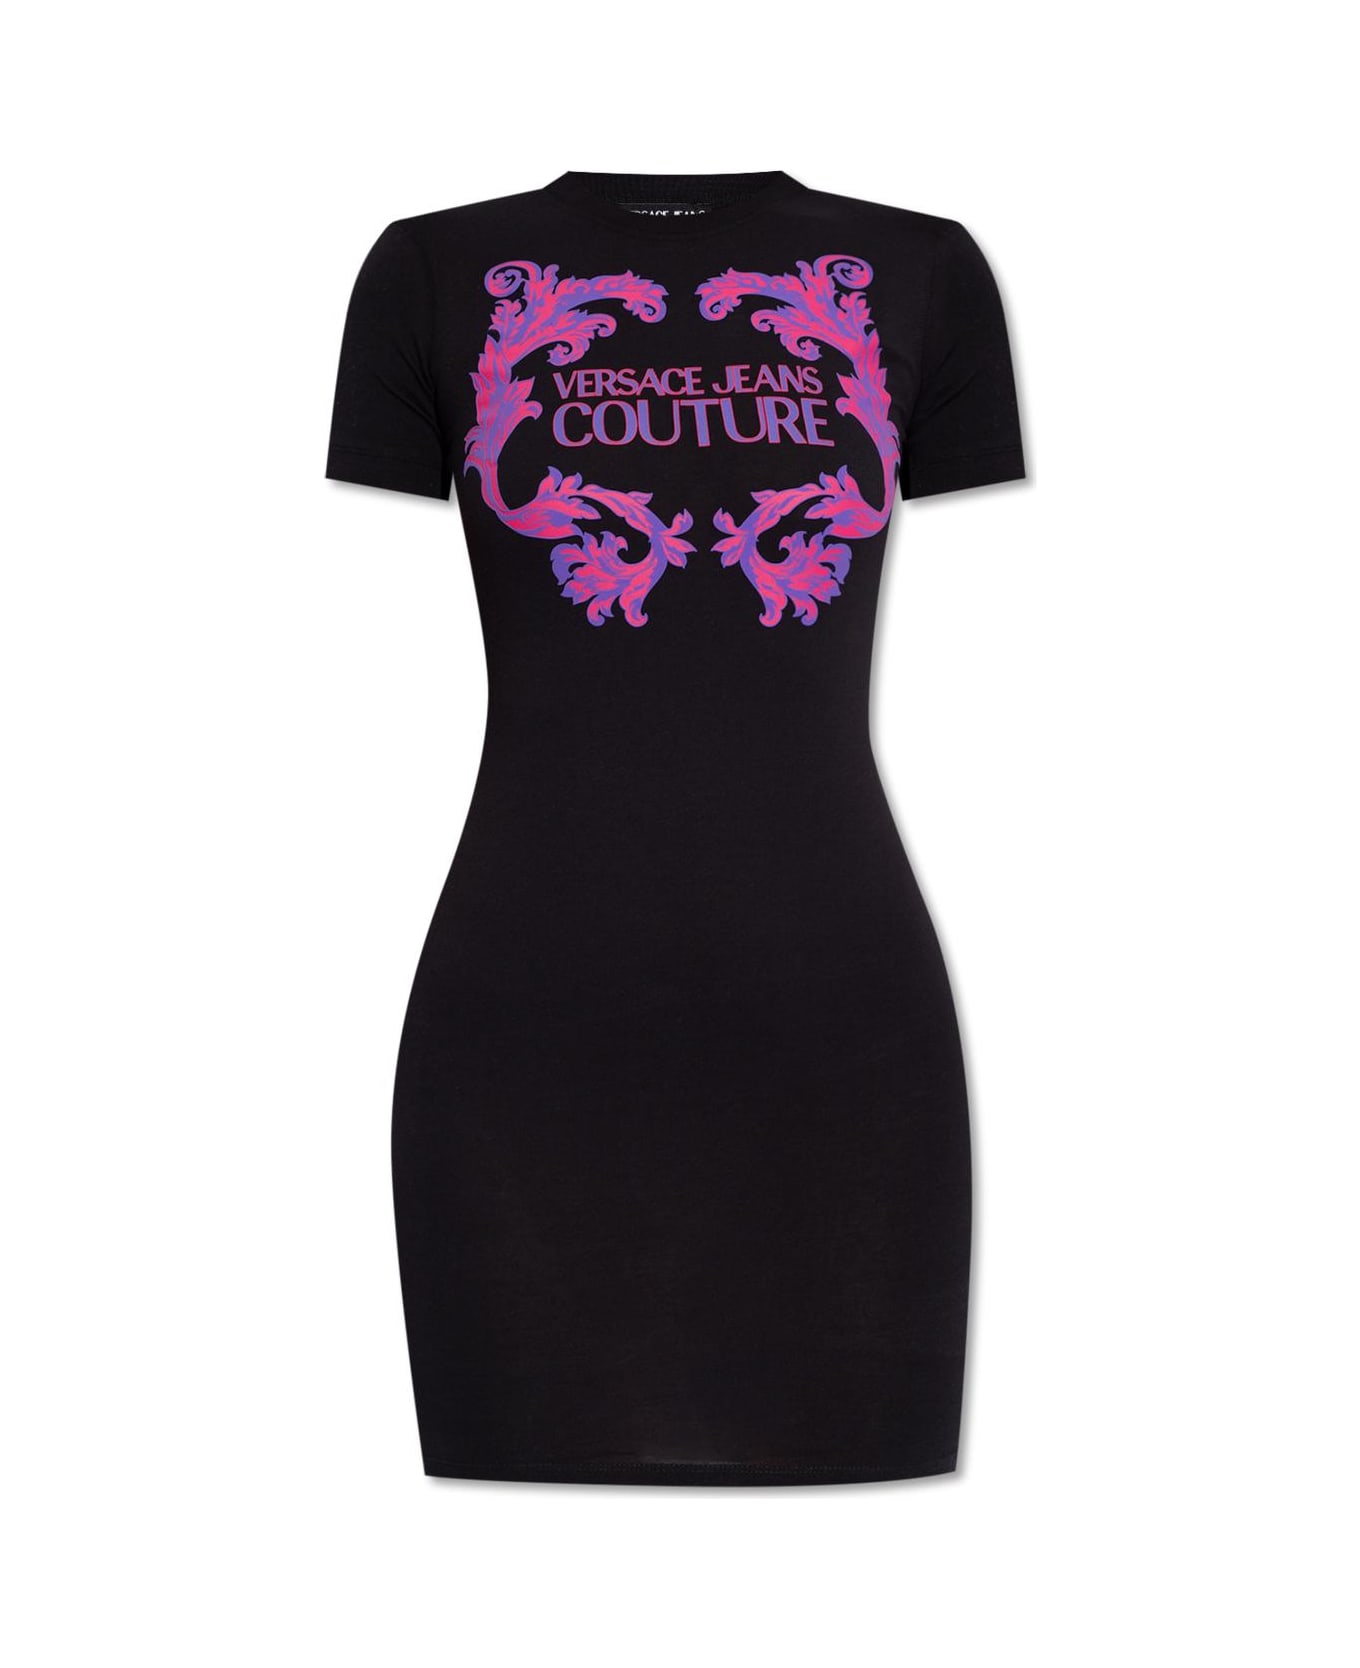 Versace Jeans Couture Printed Dress - Black